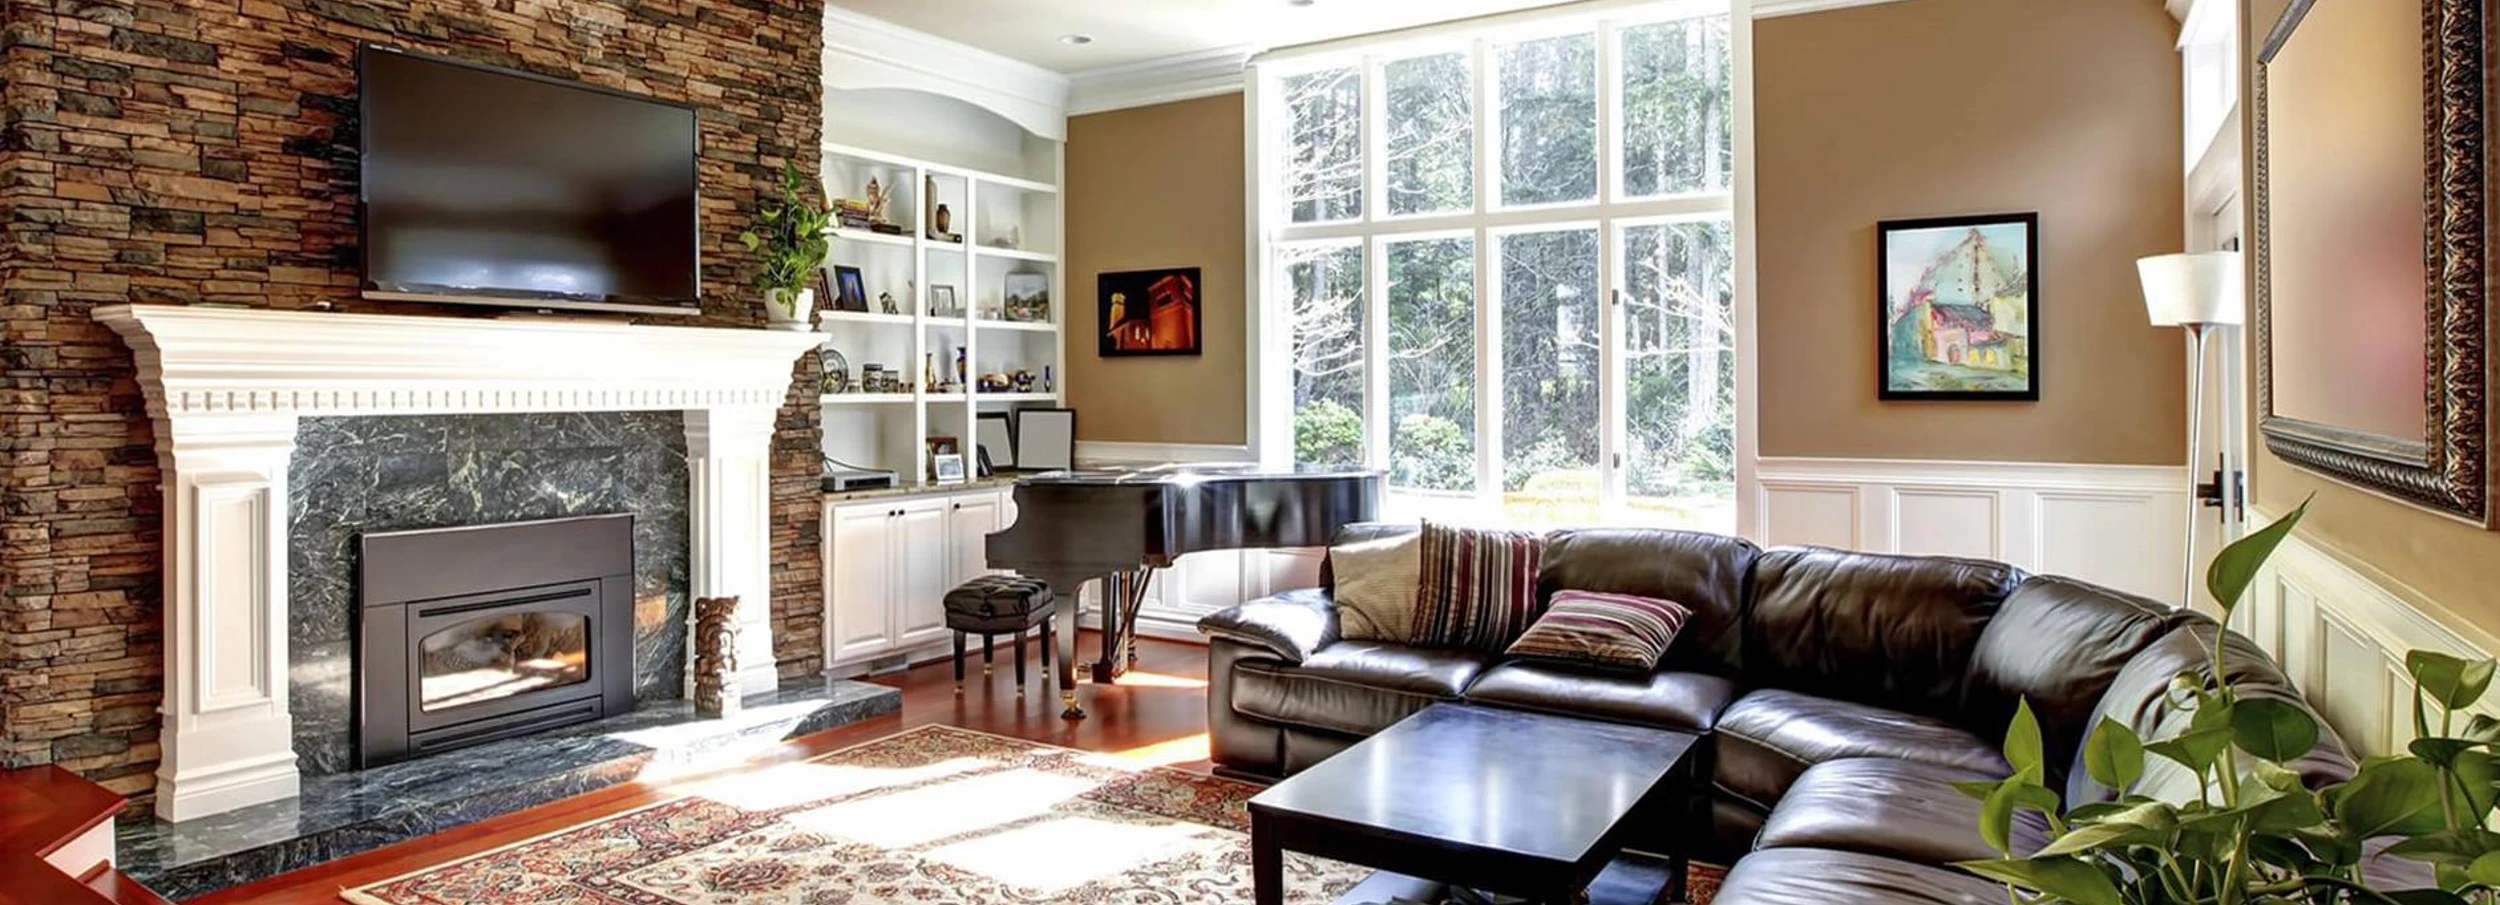 living room with large brown leather sofa and window looking out to trees